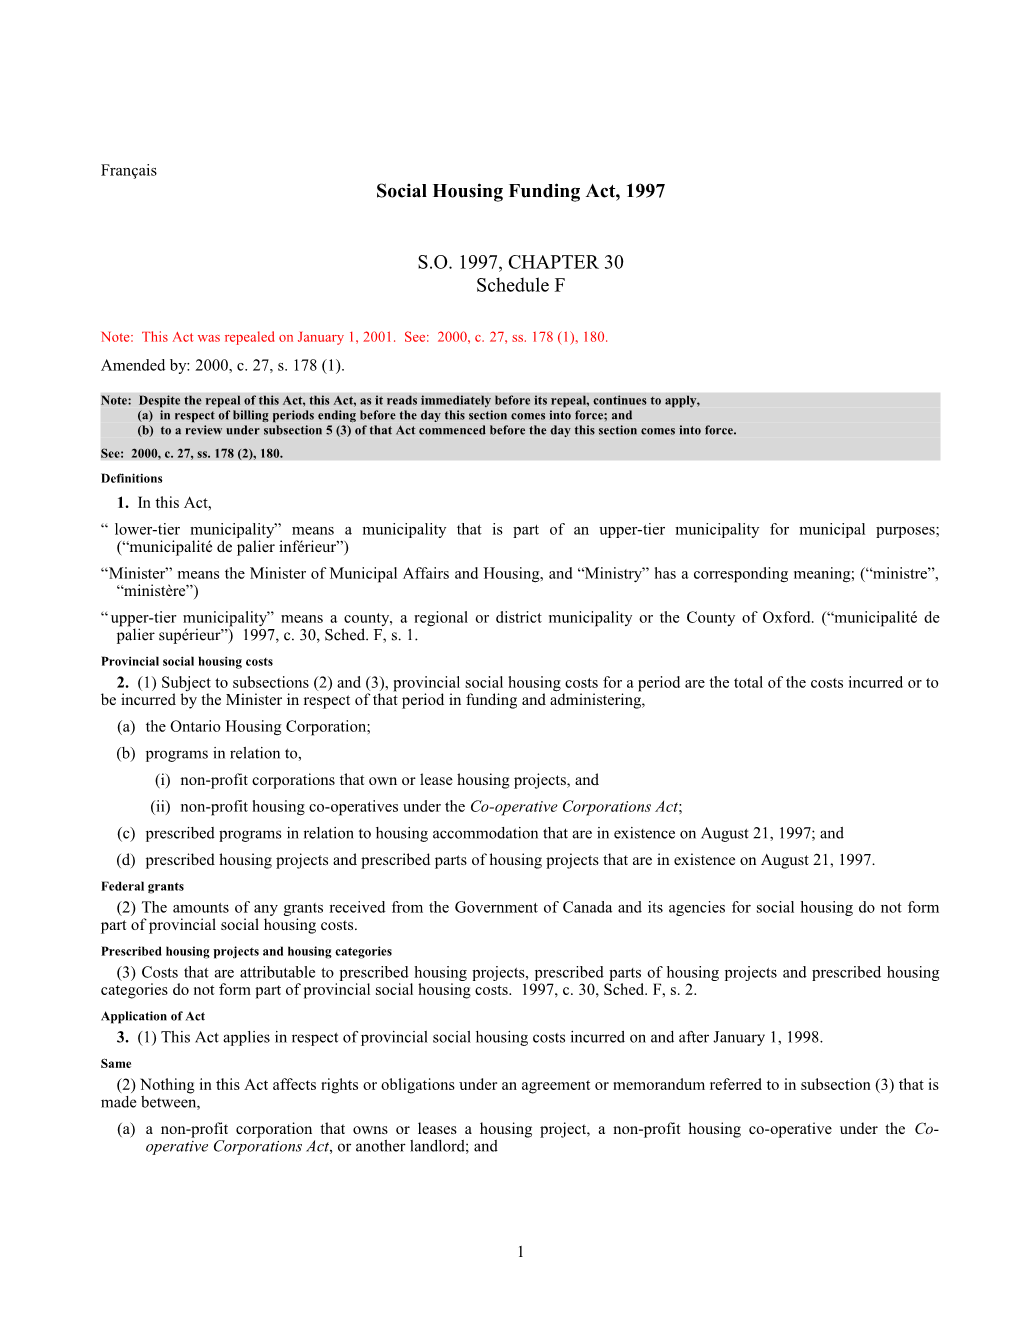 Social Housing Funding Act, 1997, S.O. 1997, C. 30, Sched. F